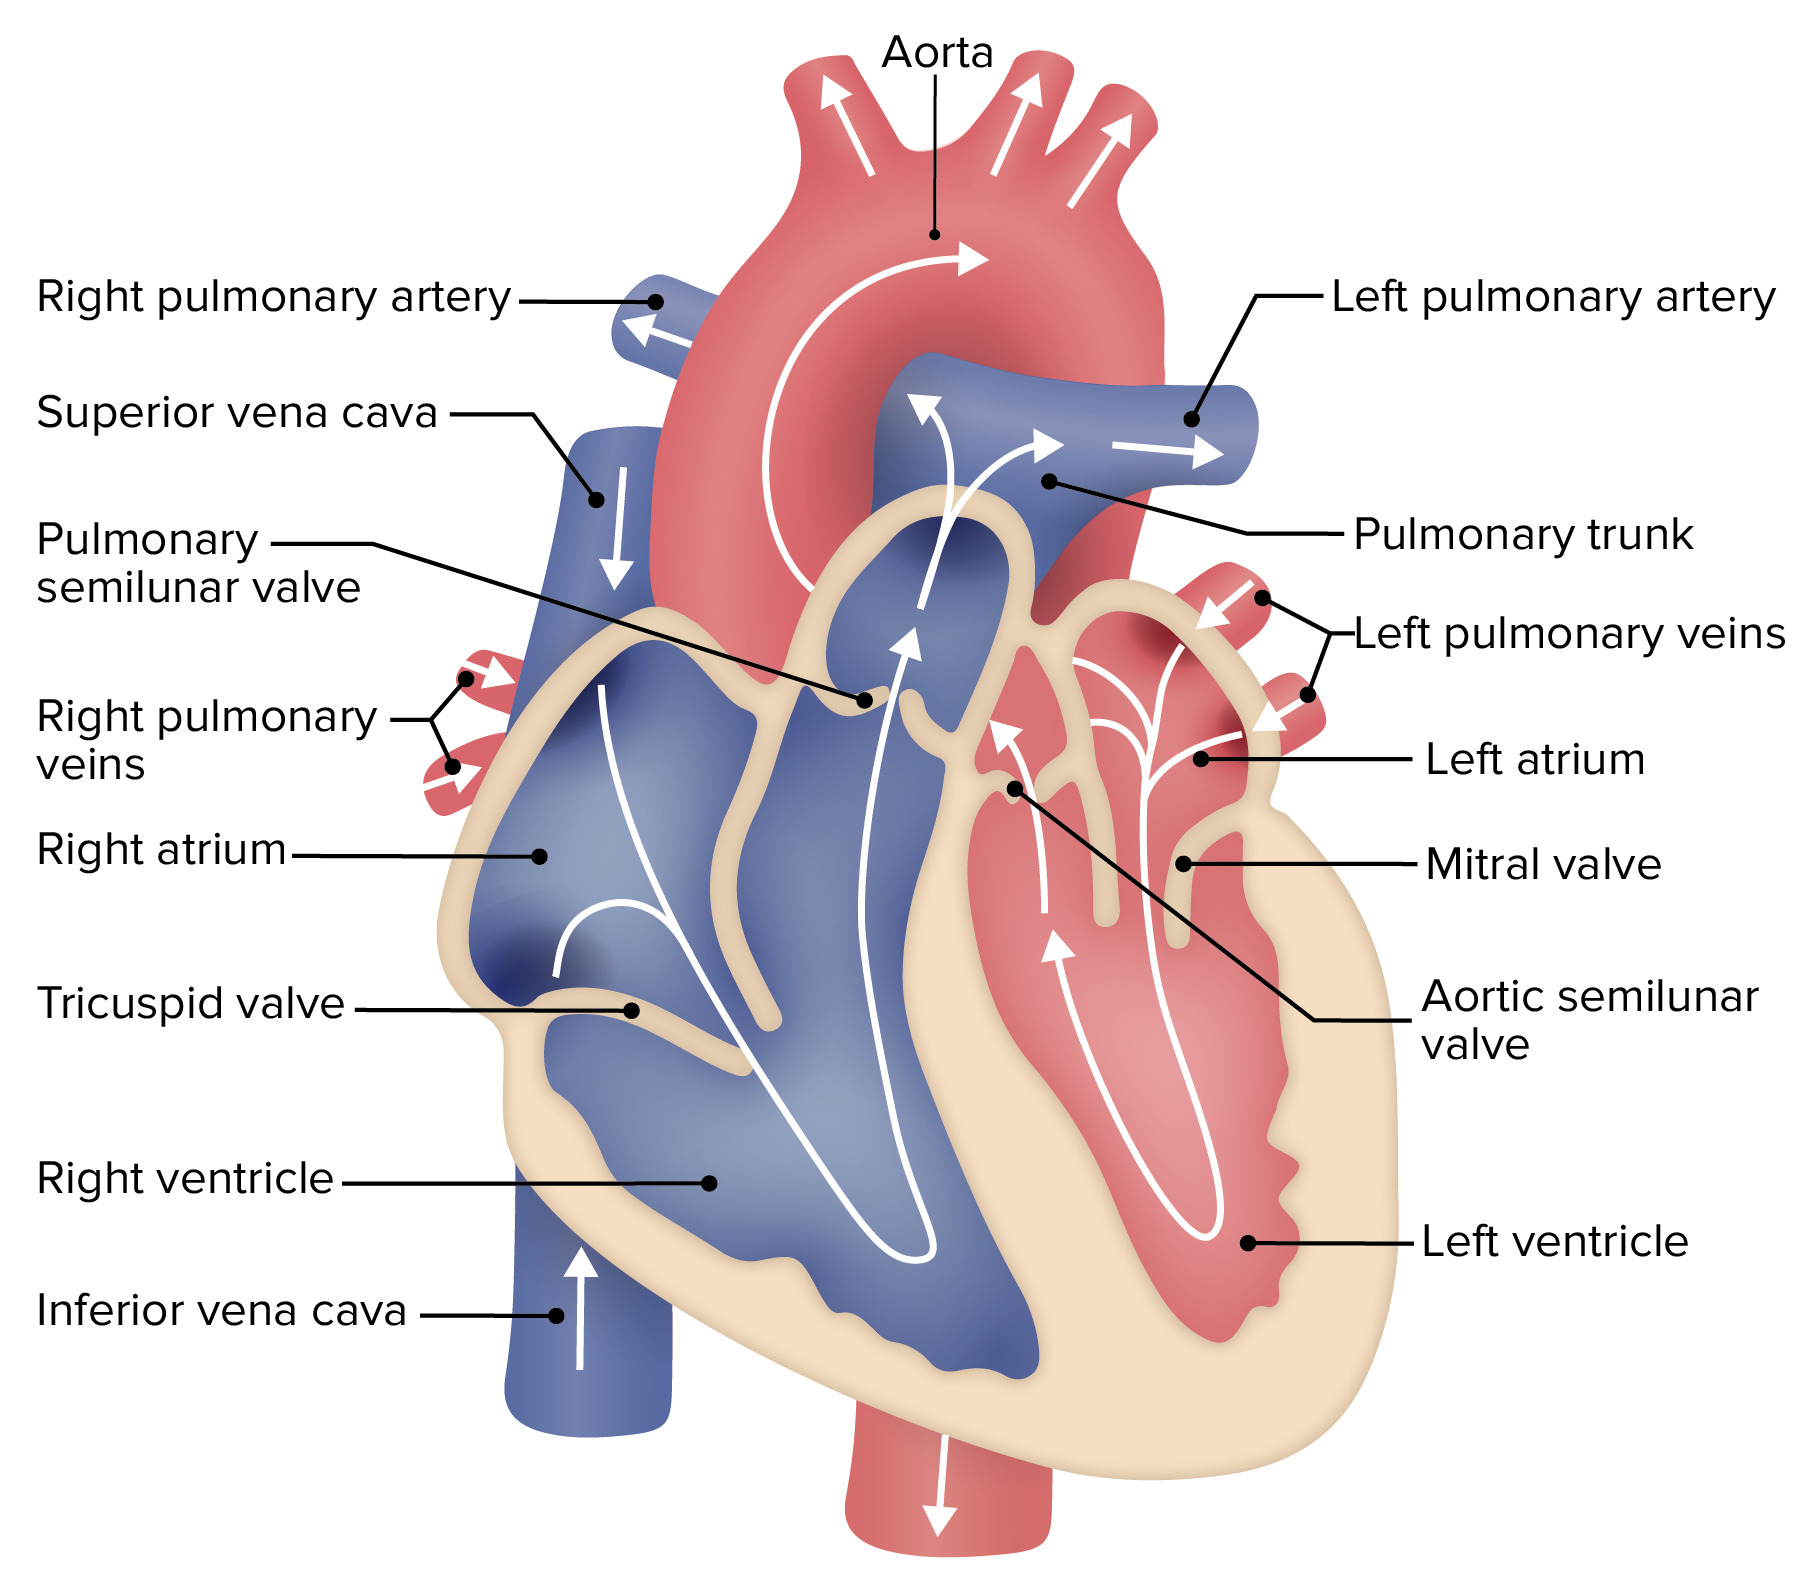 Cardiac Cycle | Concise Medical Knowledge